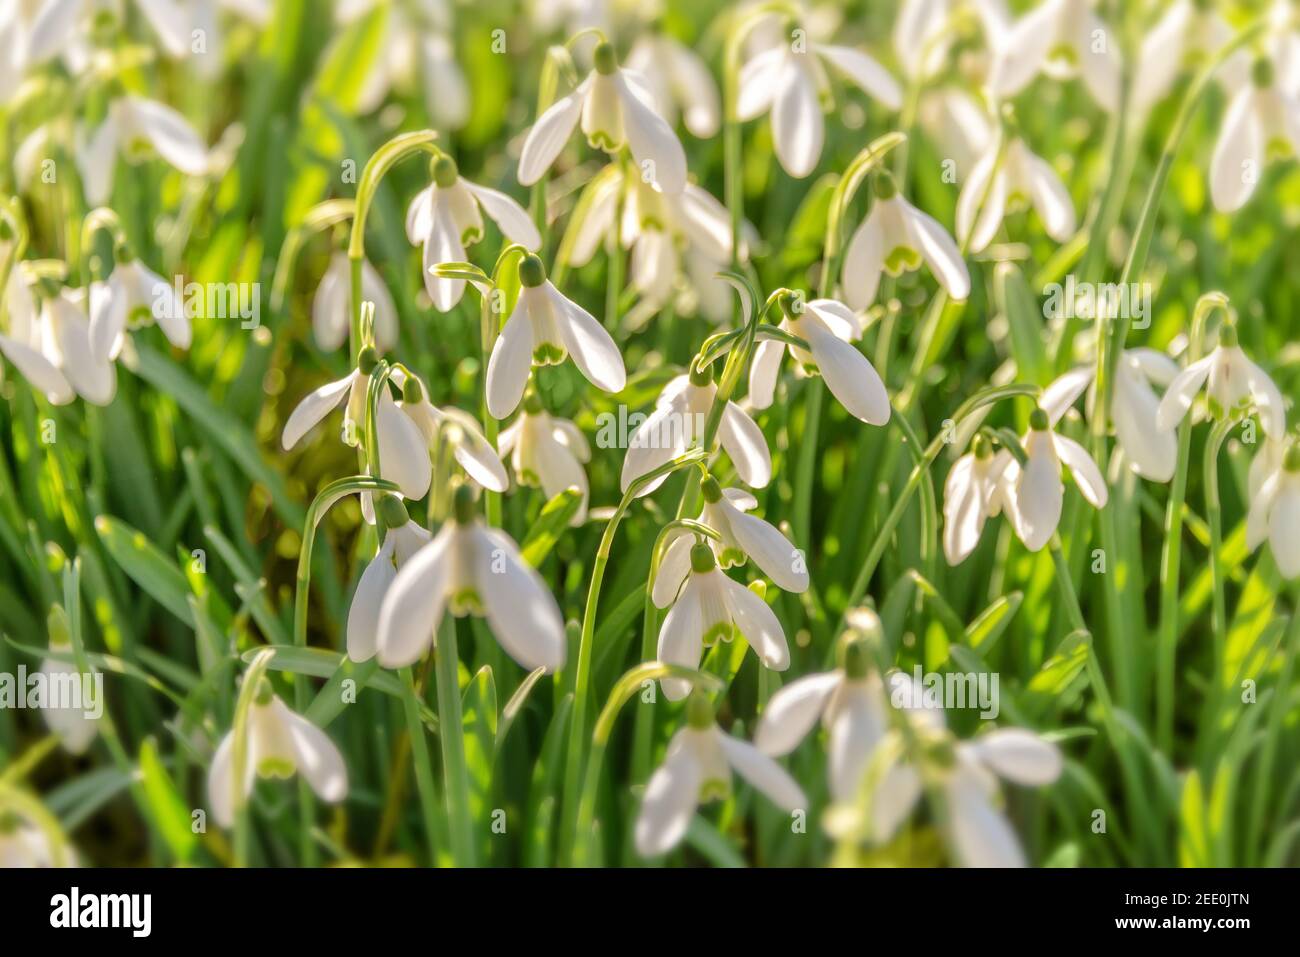 Snowdrop flowers (Galanthus nivalis) in the grass at the beginning of spring Stock Photo